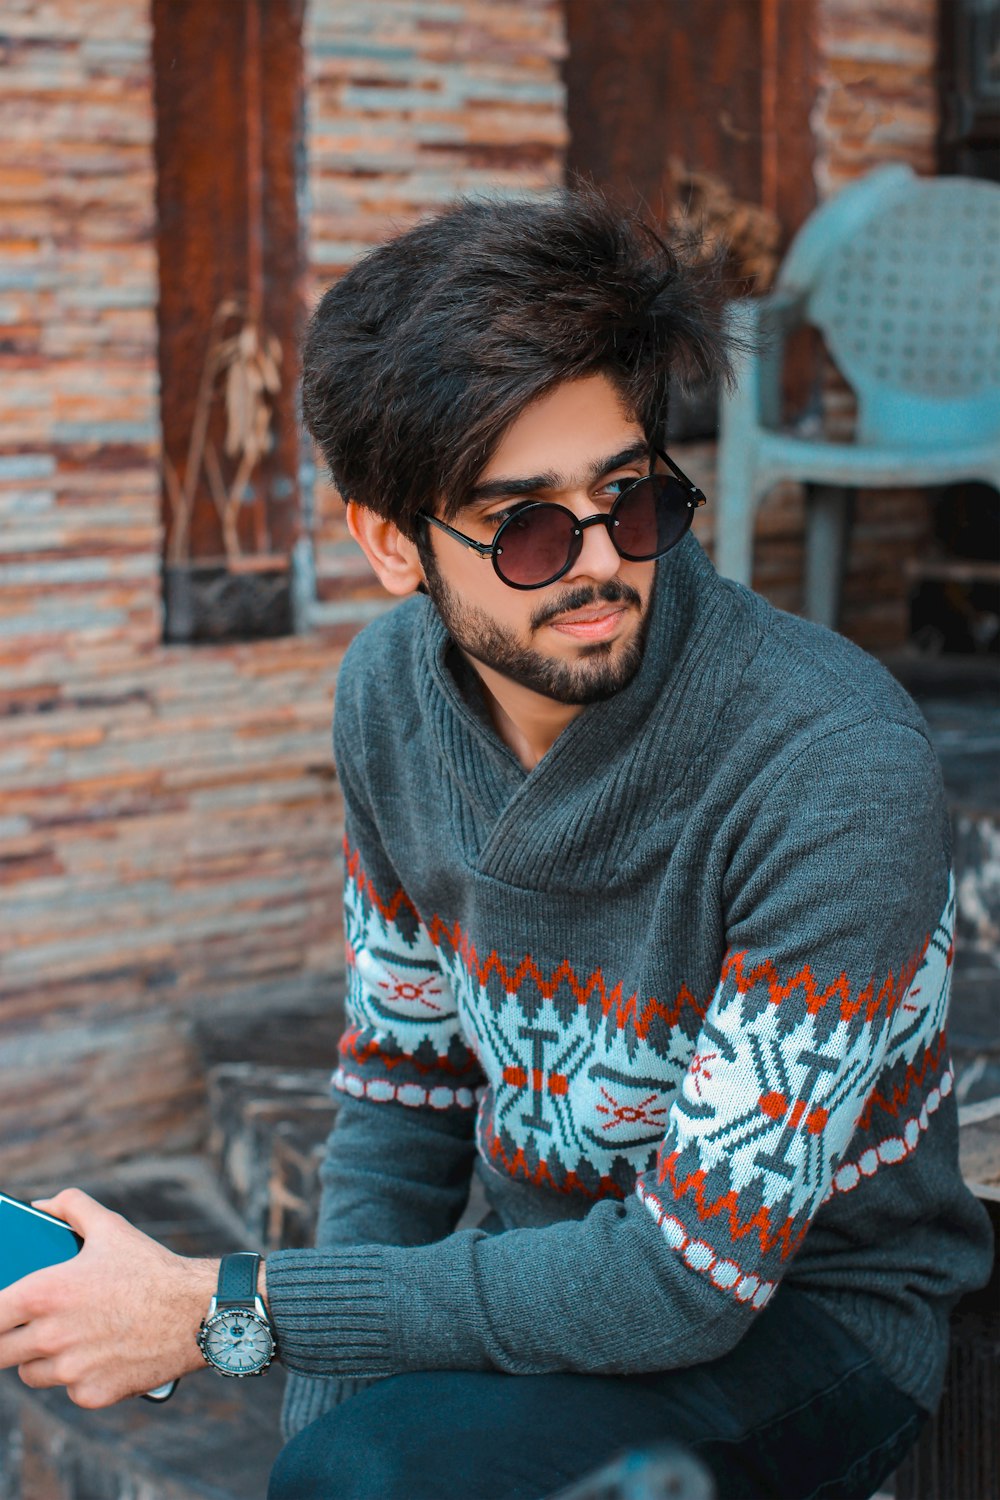 a man sitting on a bench wearing a sweater and sunglasses